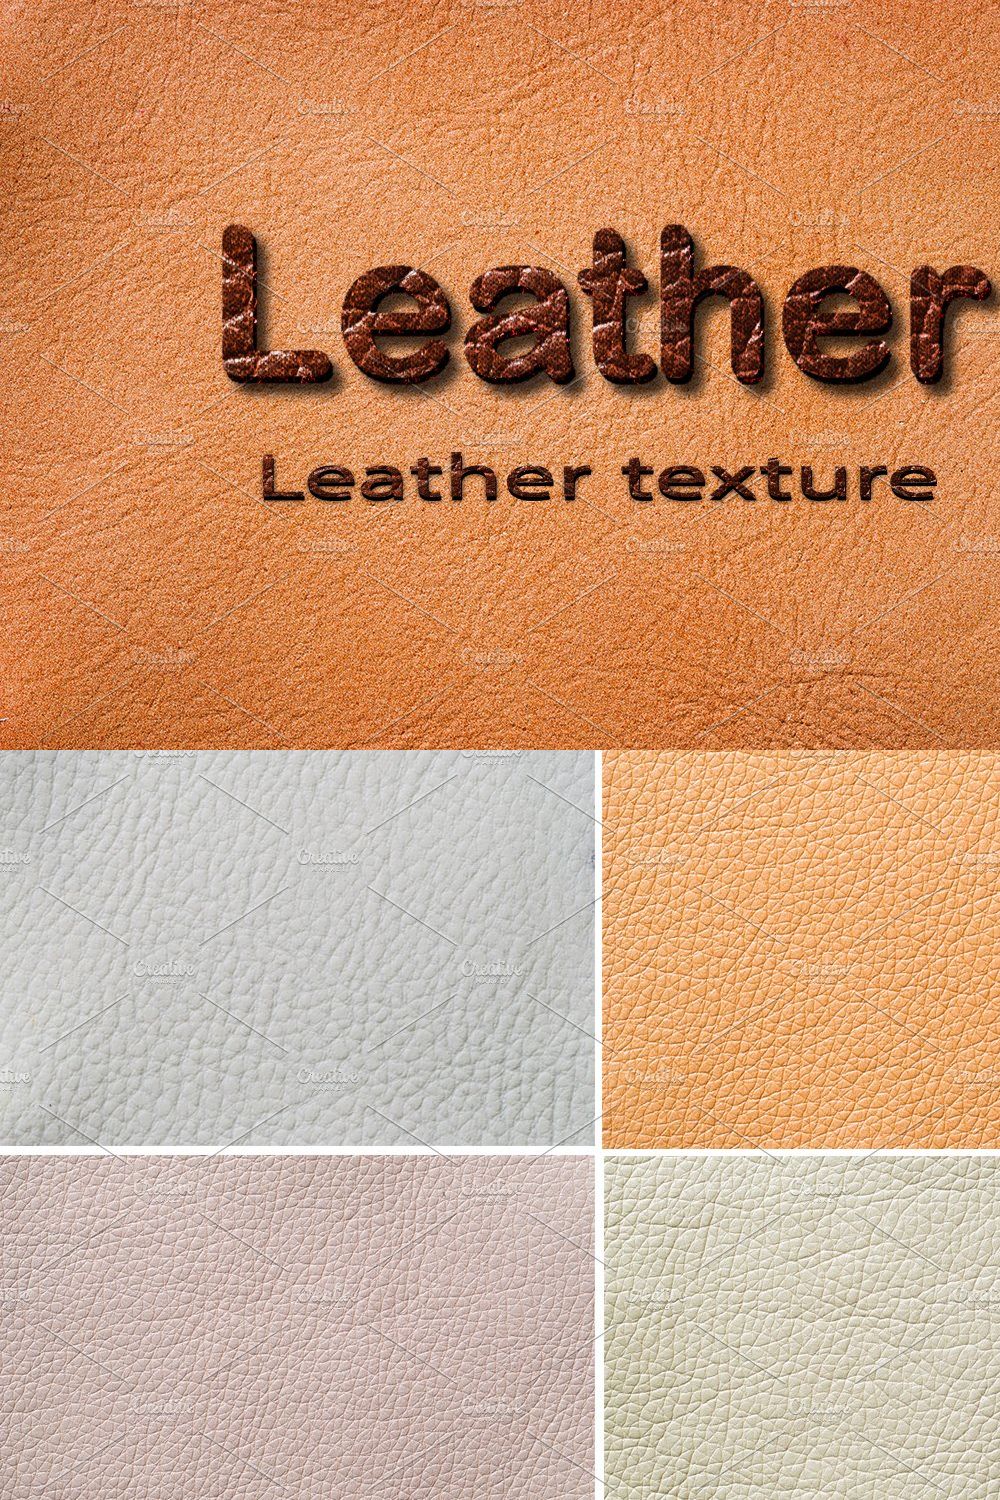 Set of leather textures pinterest preview image.